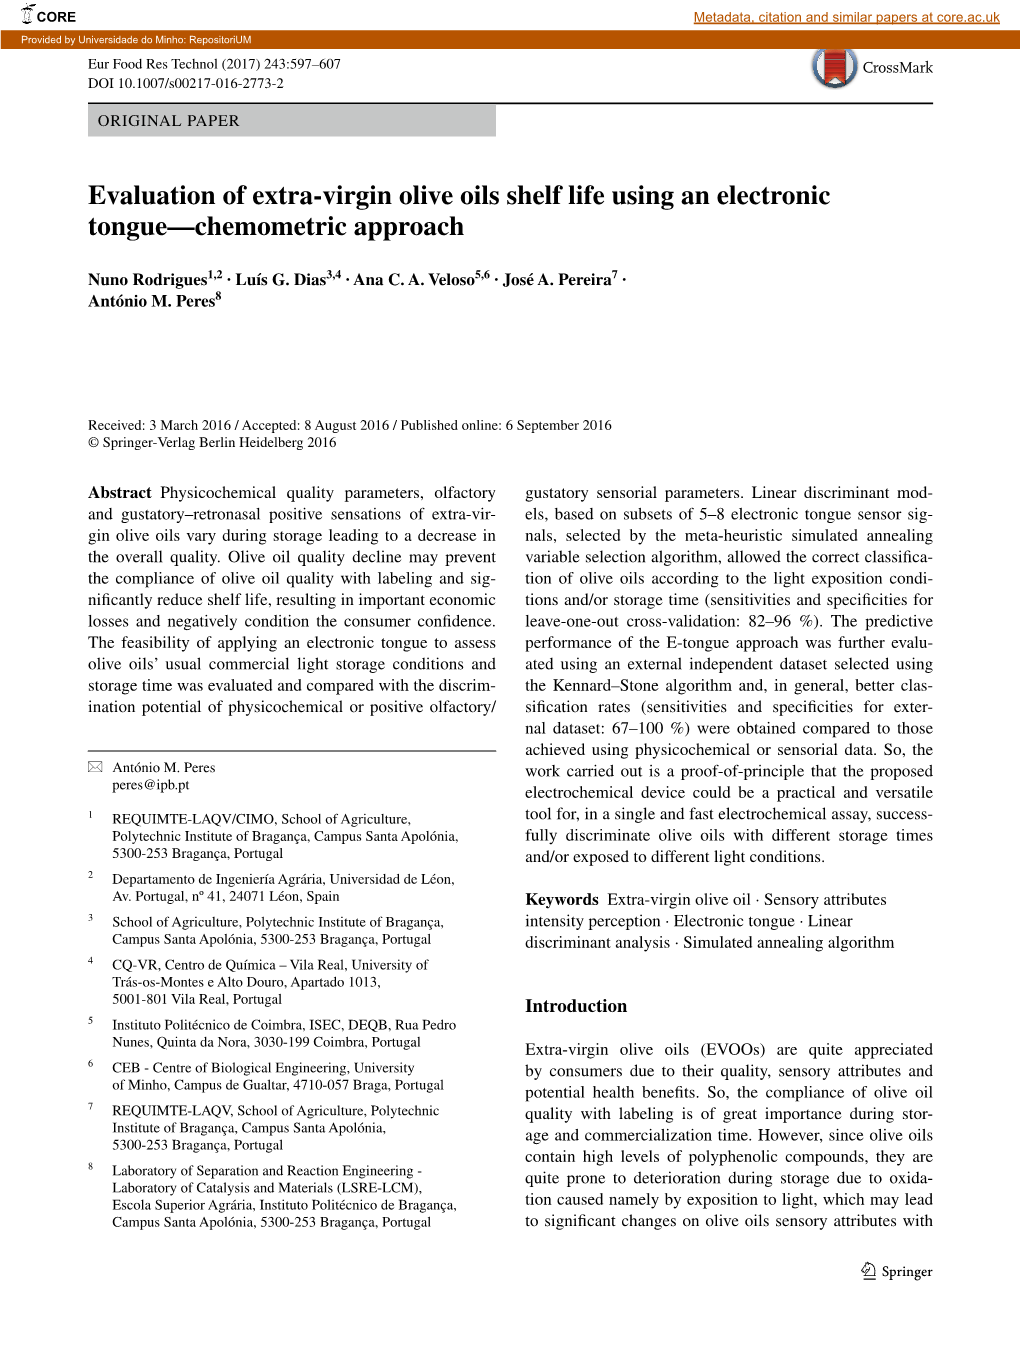 Evaluation of Extra-Virgin Olive Oils Shelf Life Using an Electronic Tongue